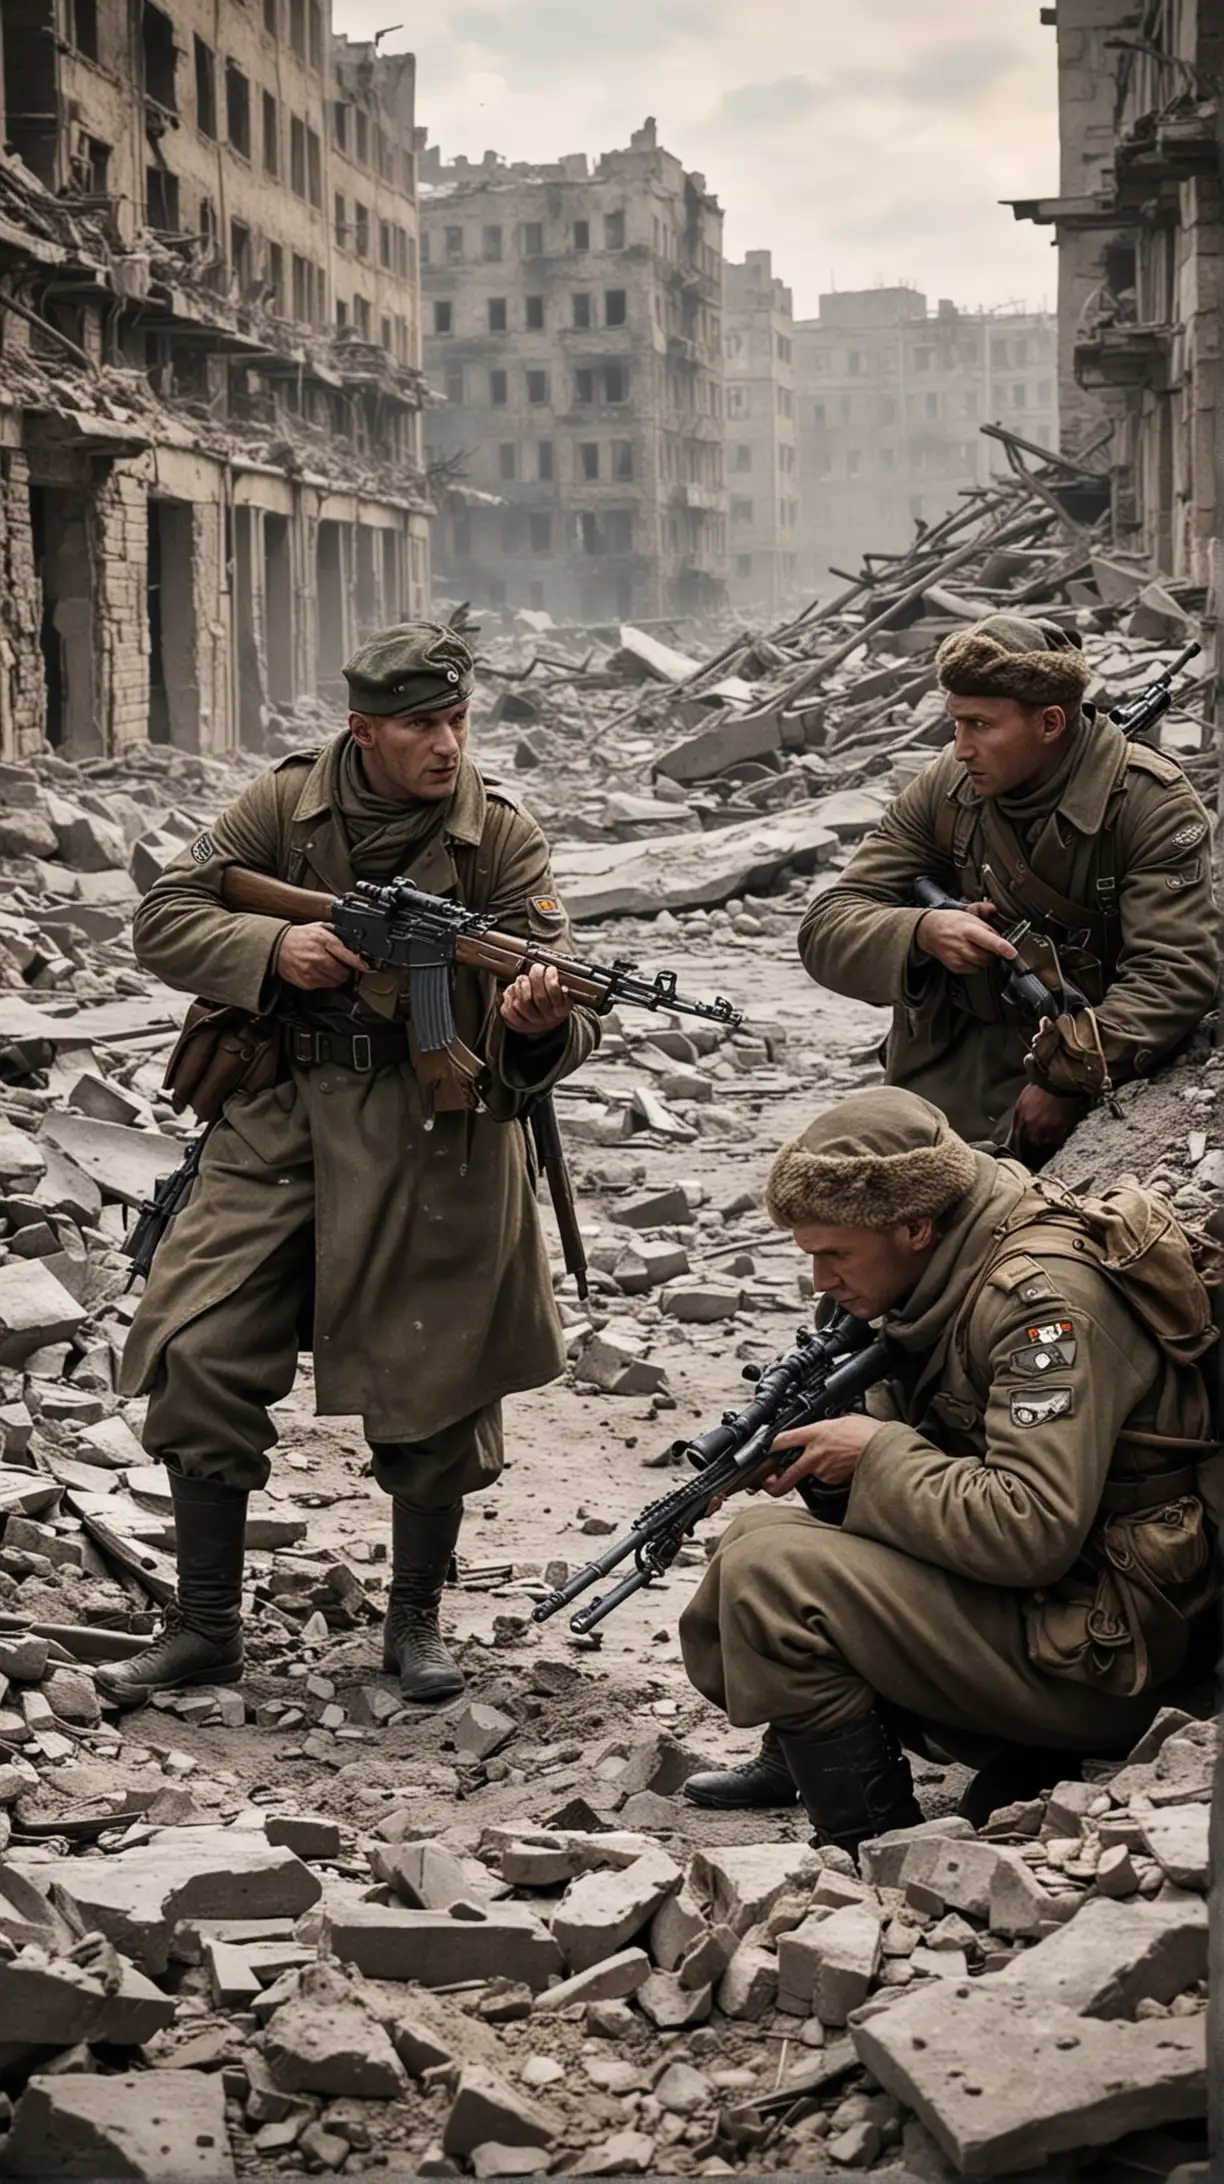 Sniper Duel": Depict a tense sniper duel in the ruins of Stalingrad. Show Soviet and German snipers taking cover amidst the rubble, aiming at each other with intense focus.